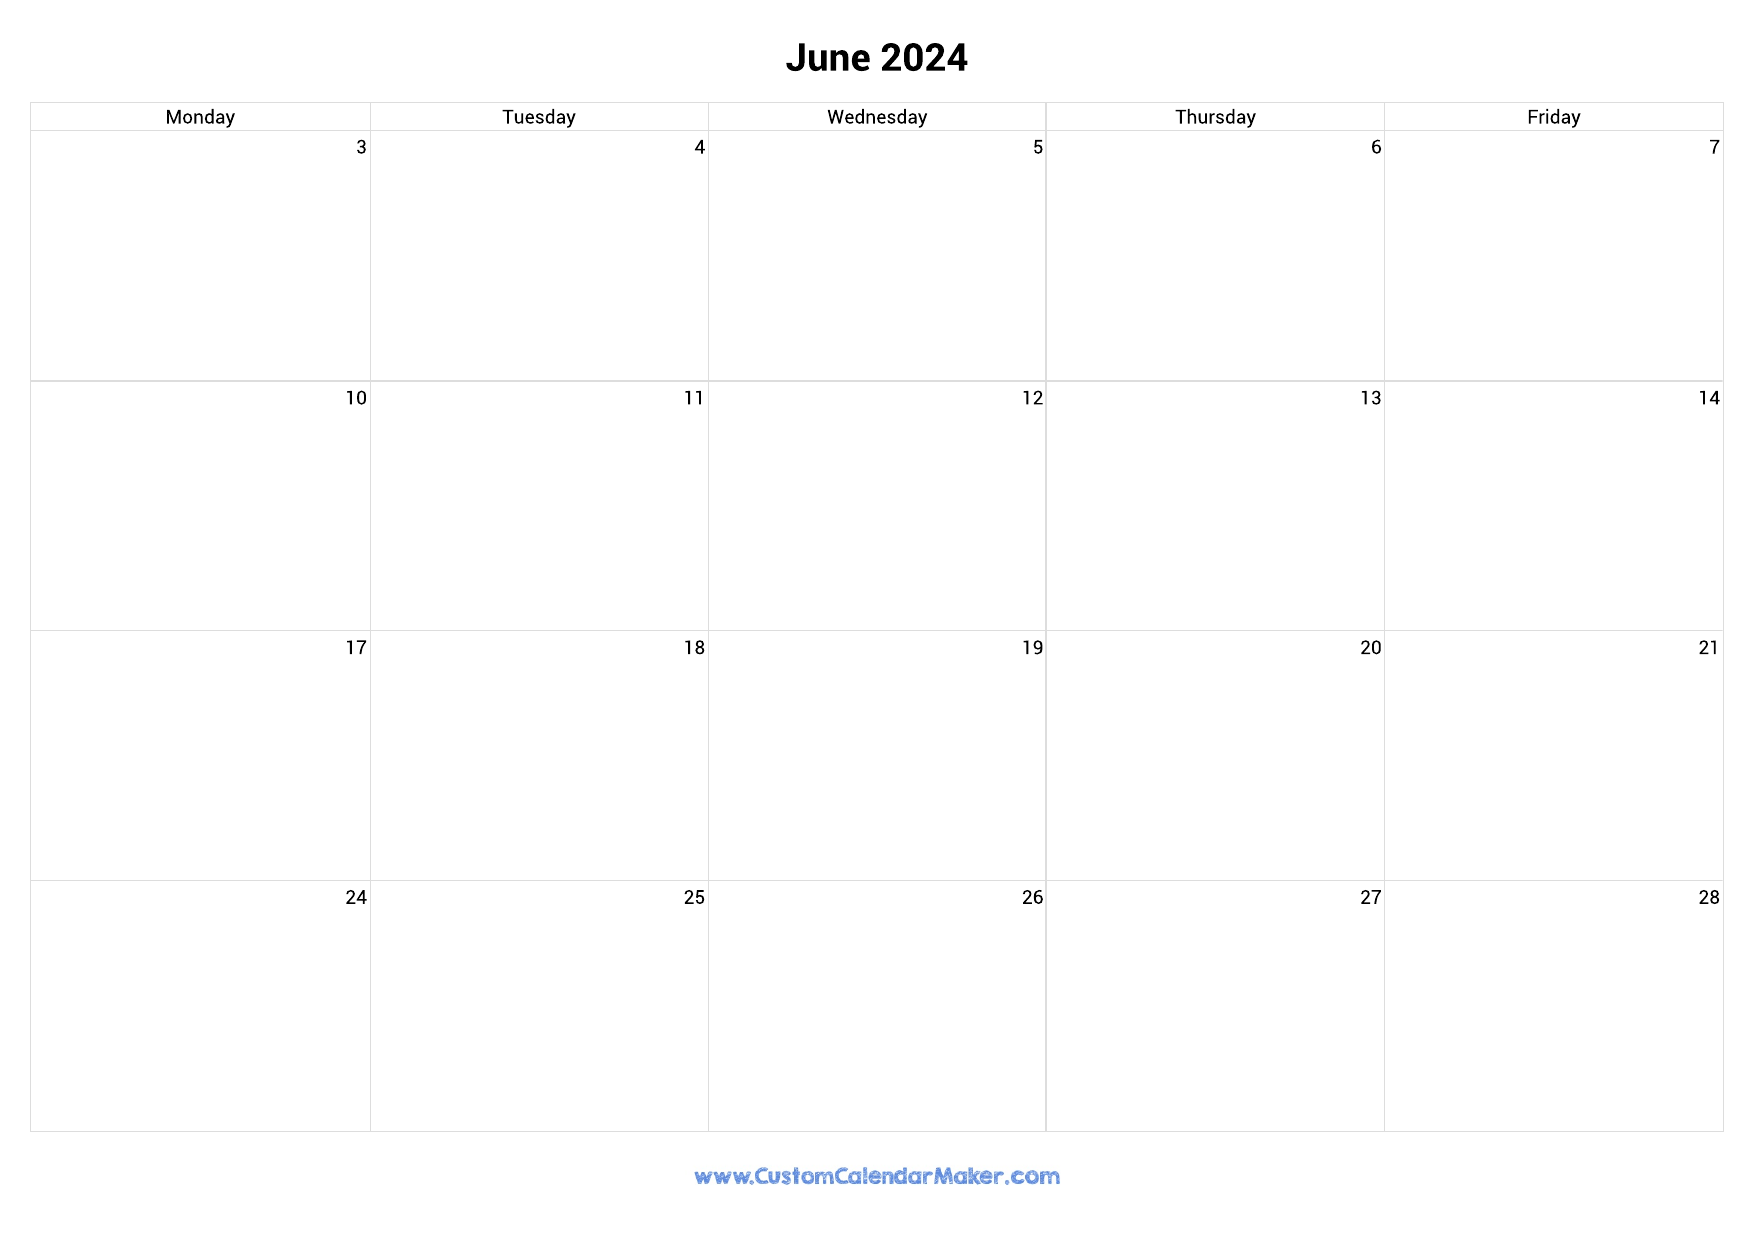 June 2024 Calendar Weekdays Only Monday to Friday